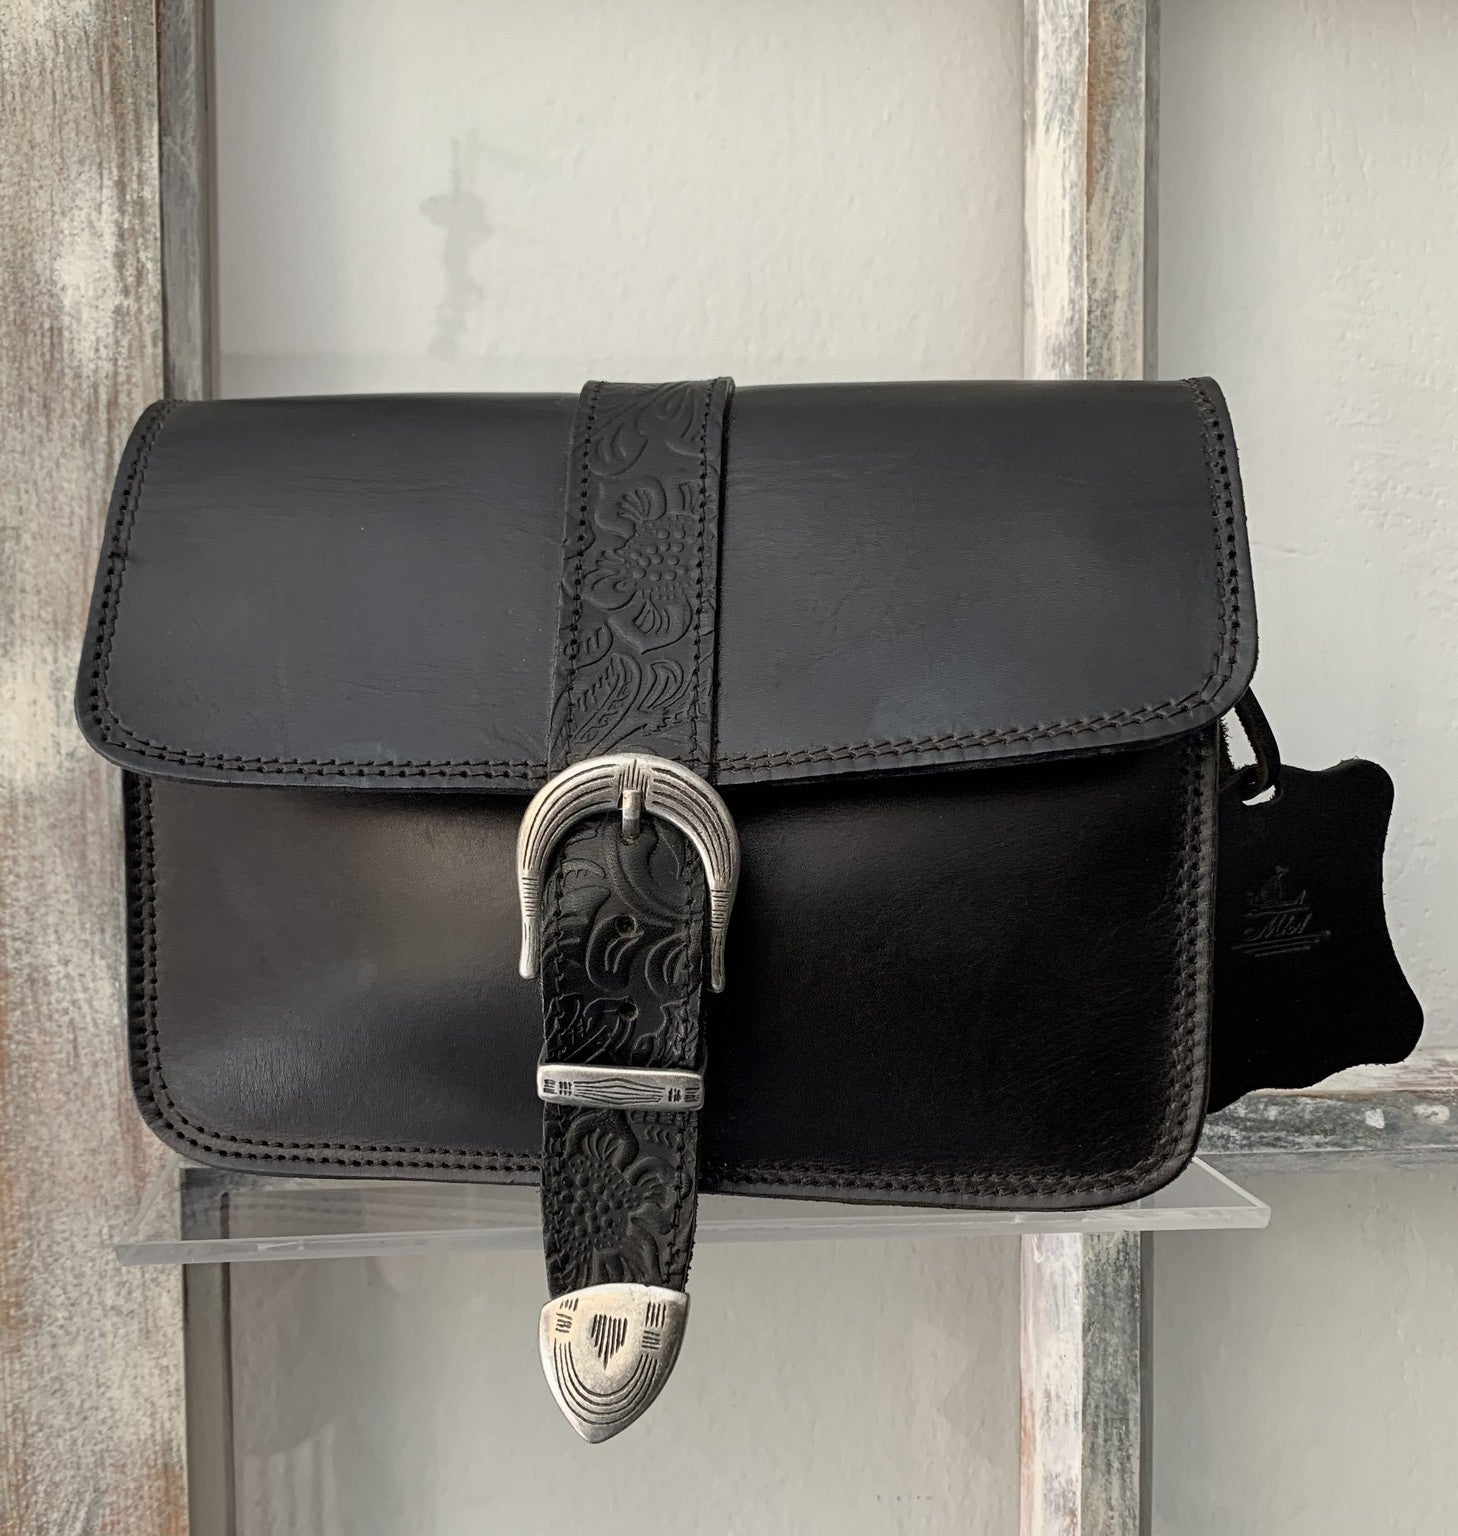 "Kalypso" - small crossbody bag handcrafted from natural black leather with flower details WT/55F2FM